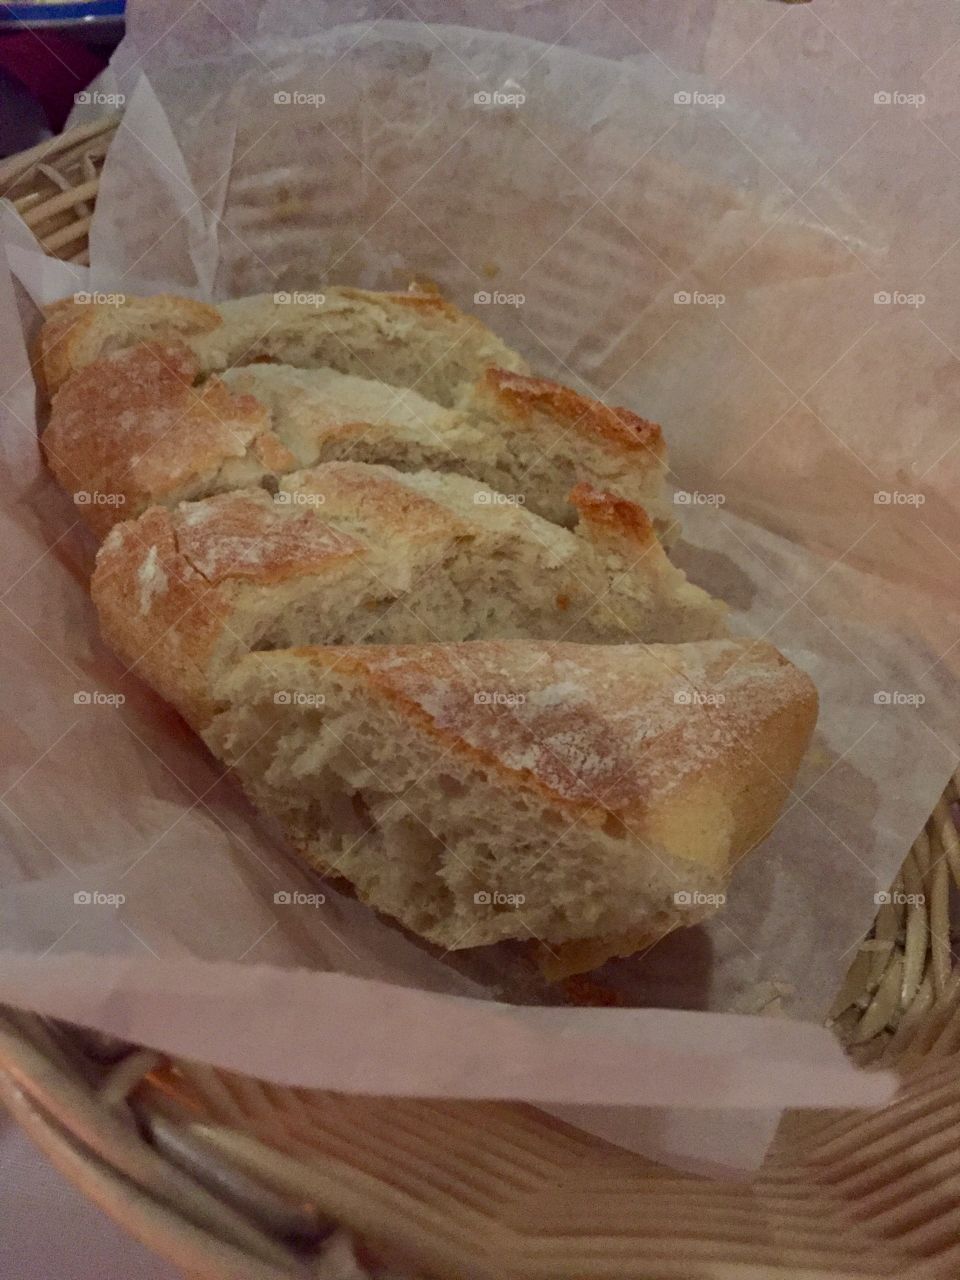 Pan gallego (Galician bread) is a delicious type of bread served in Spanish restaurants